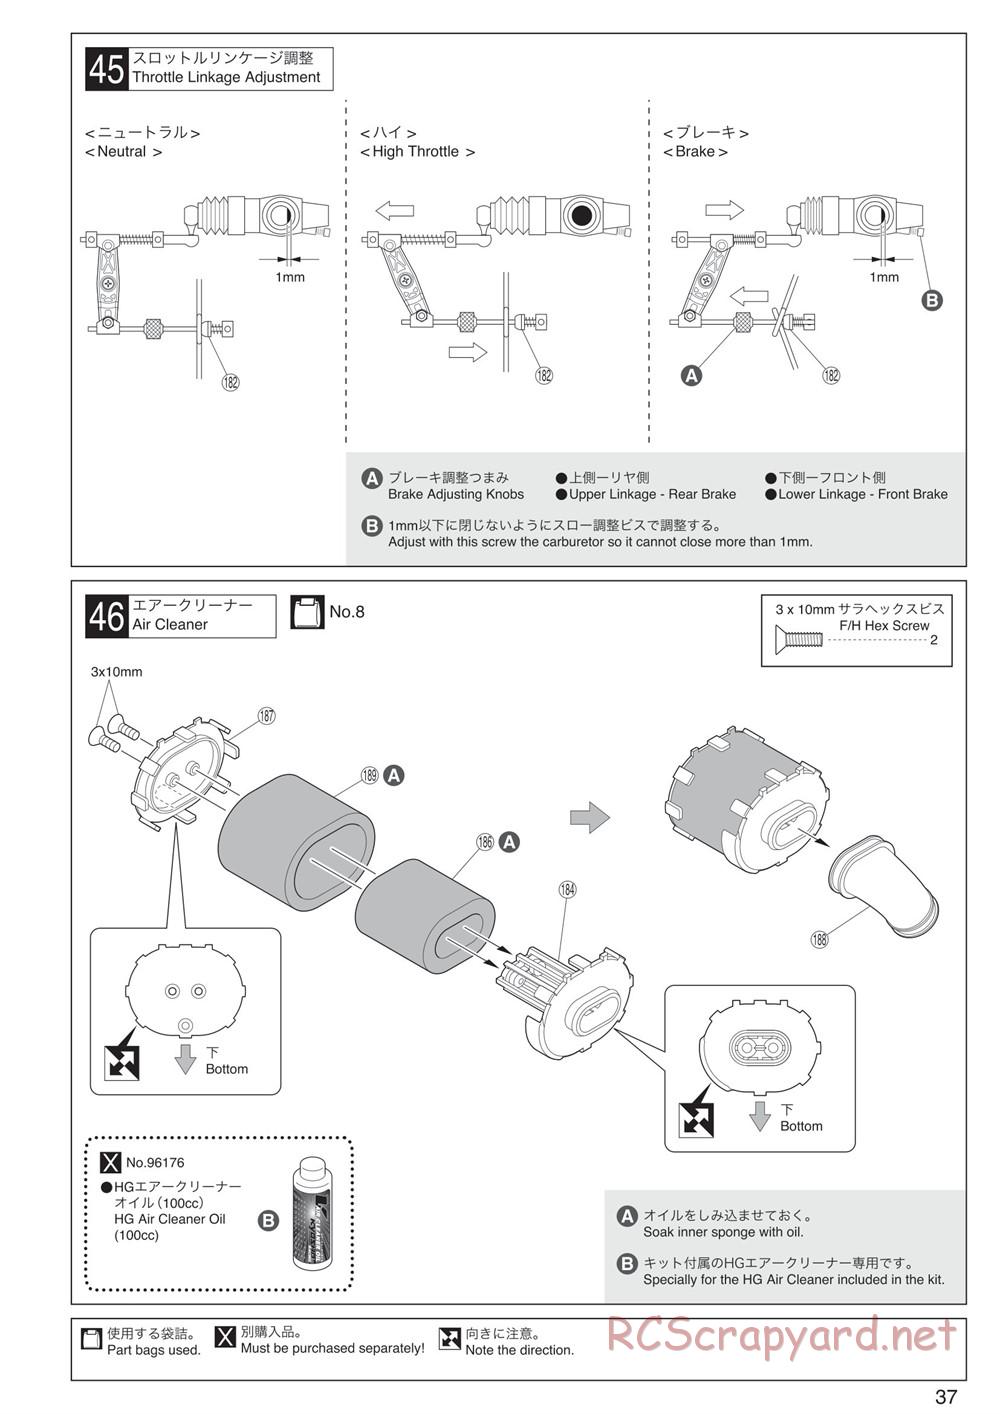 Kyosho - Inferno MP9 TKI4 10th Anniversary Special Edition - Manual - Page 37